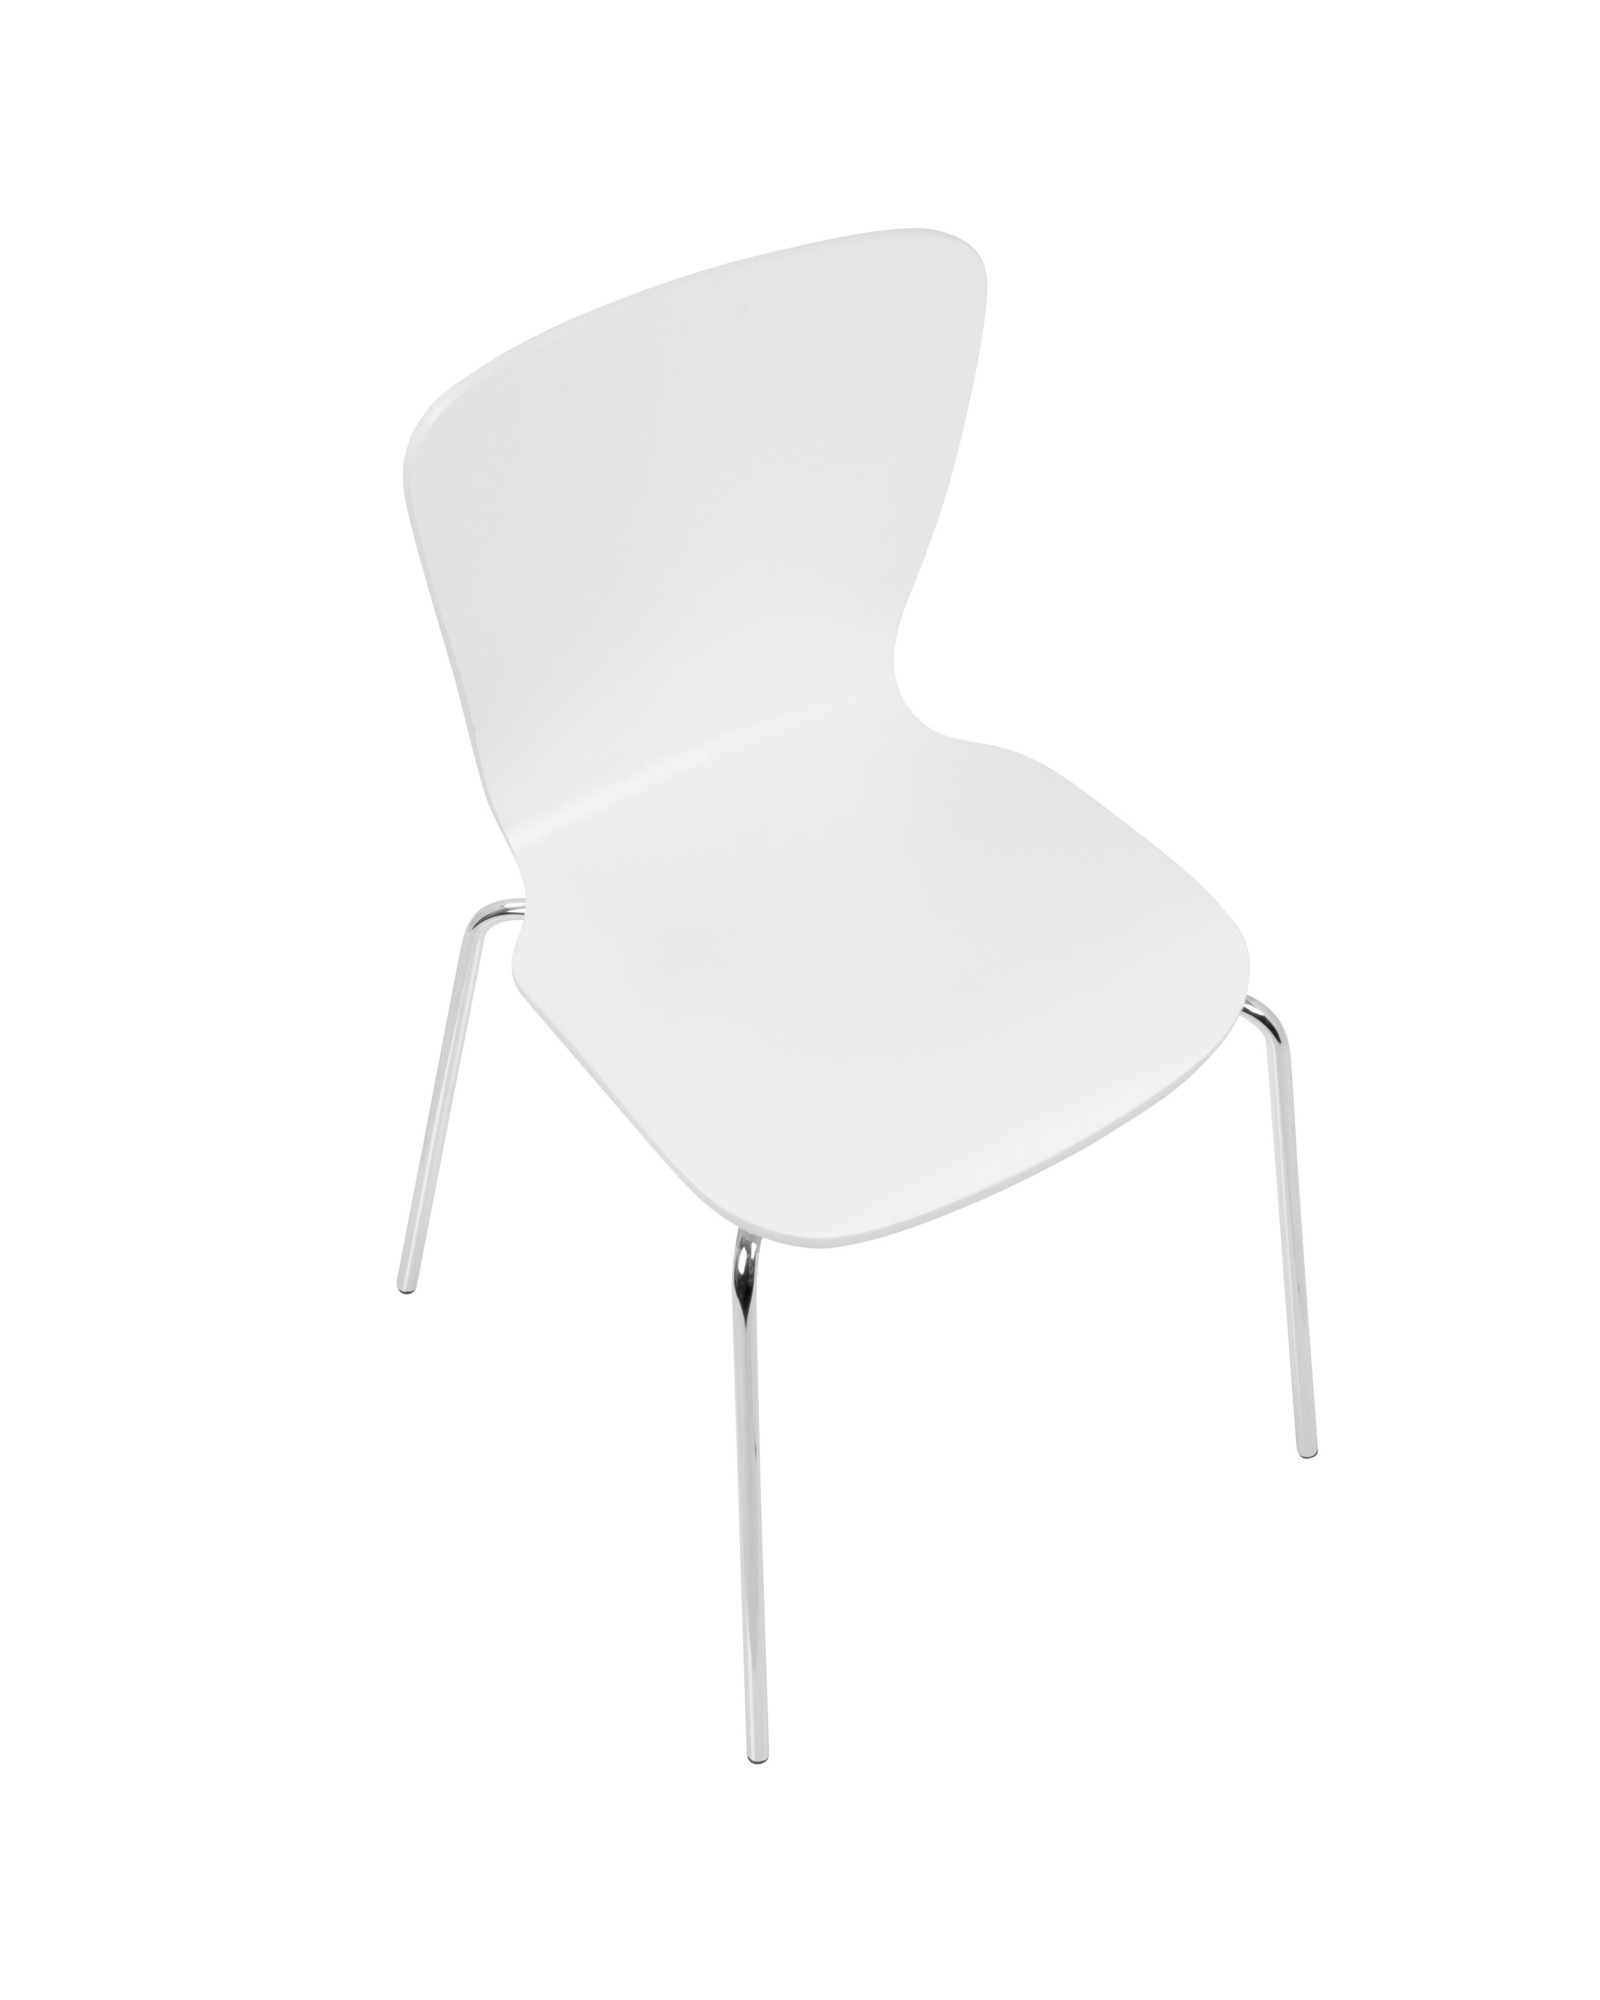 Woodstacker Contemporary Dining Chairs in White -Set of 4